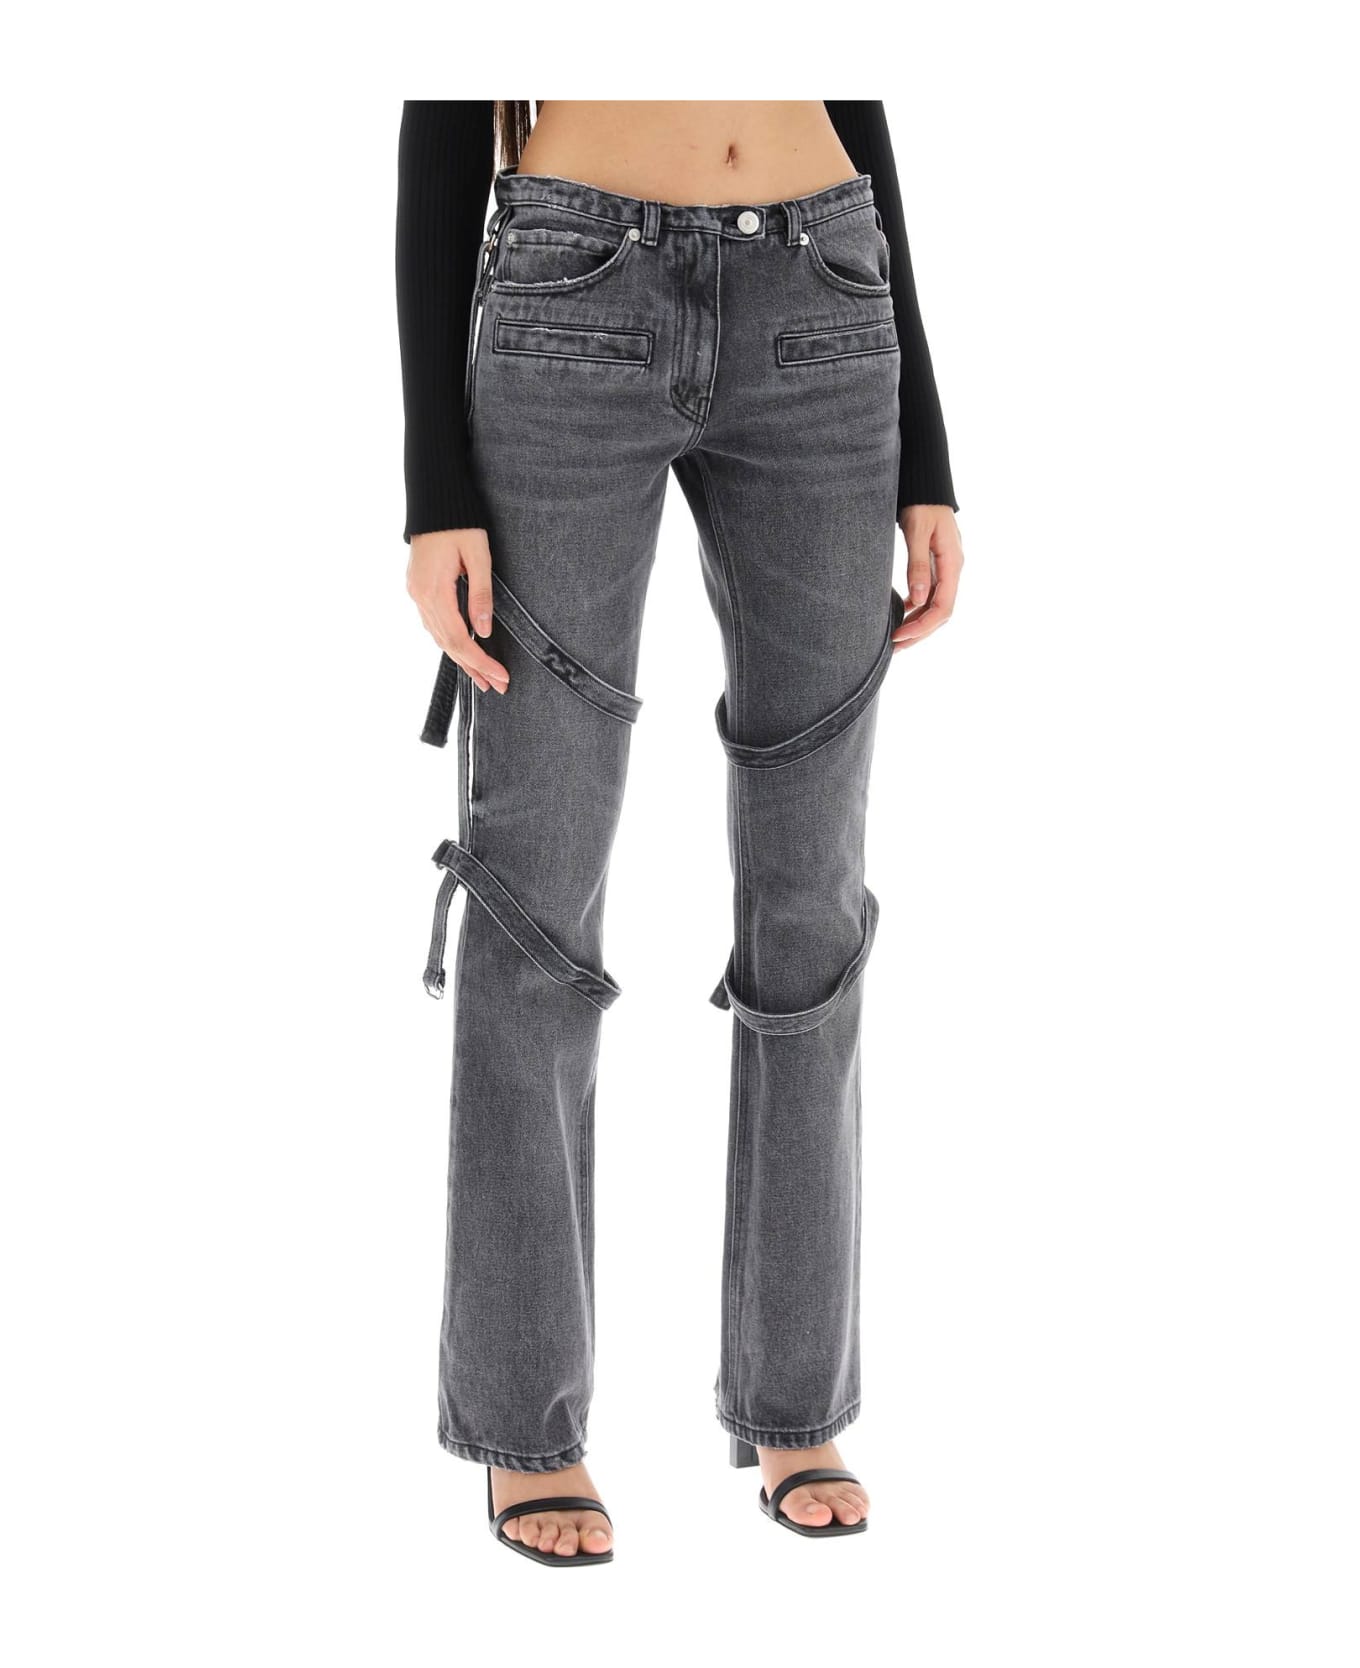 Courrèges Bootcut Jeans With Straps - STONEWAHSED GREY (Grey) デニム